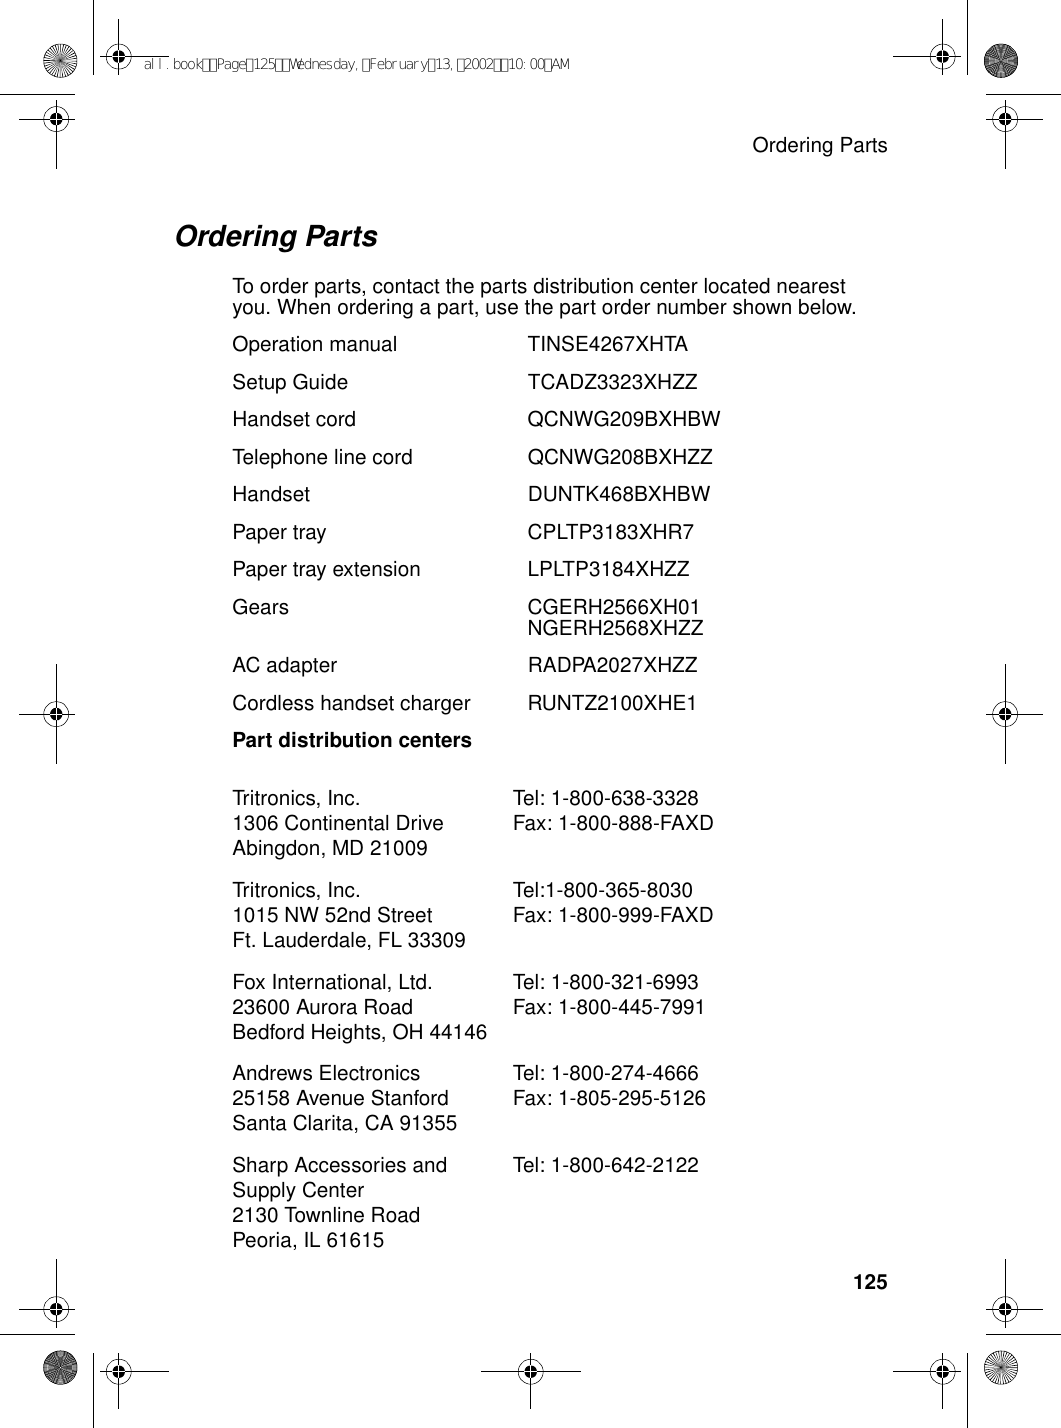 Ordering Parts125Ordering PartsTo order parts, contact the parts distribution center located nearest you. When ordering a part, use the part order number shown below. Operation manual  TINSE4267XHTASetup Guide TCADZ3323XHZZHandset cord QCNWG209BXHBWTelephone line cord QCNWG208BXHZZHandset DUNTK468BXHBWPaper tray CPLTP3183XHR7Paper tray extension  LPLTP3184XHZZGears CGERH2566XH01NGERH2568XHZZAC adapter RADPA2027XHZZCordless handset charger RUNTZ2100XHE1Part distribution centers Tritronics, Inc. 1306 Continental Drive Abingdon, MD 21009Tel: 1-800-638-3328 Fax: 1-800-888-FAXD Tritronics, Inc. 1015 NW 52nd Street Ft. Lauderdale, FL 33309Tel:1-800-365-8030 Fax: 1-800-999-FAXDFox International, Ltd. 23600 Aurora Road Bedford Heights, OH 44146Tel: 1-800-321-6993 Fax: 1-800-445-7991Andrews Electronics 25158 Avenue Stanford Santa Clarita, CA 91355Tel: 1-800-274-4666 Fax: 1-805-295-5126Sharp Accessories and Supply Center 2130 Townline Road Peoria, IL 61615Tel: 1-800-642-2122all.bookPage125Wednesday,February13,200210:00AM